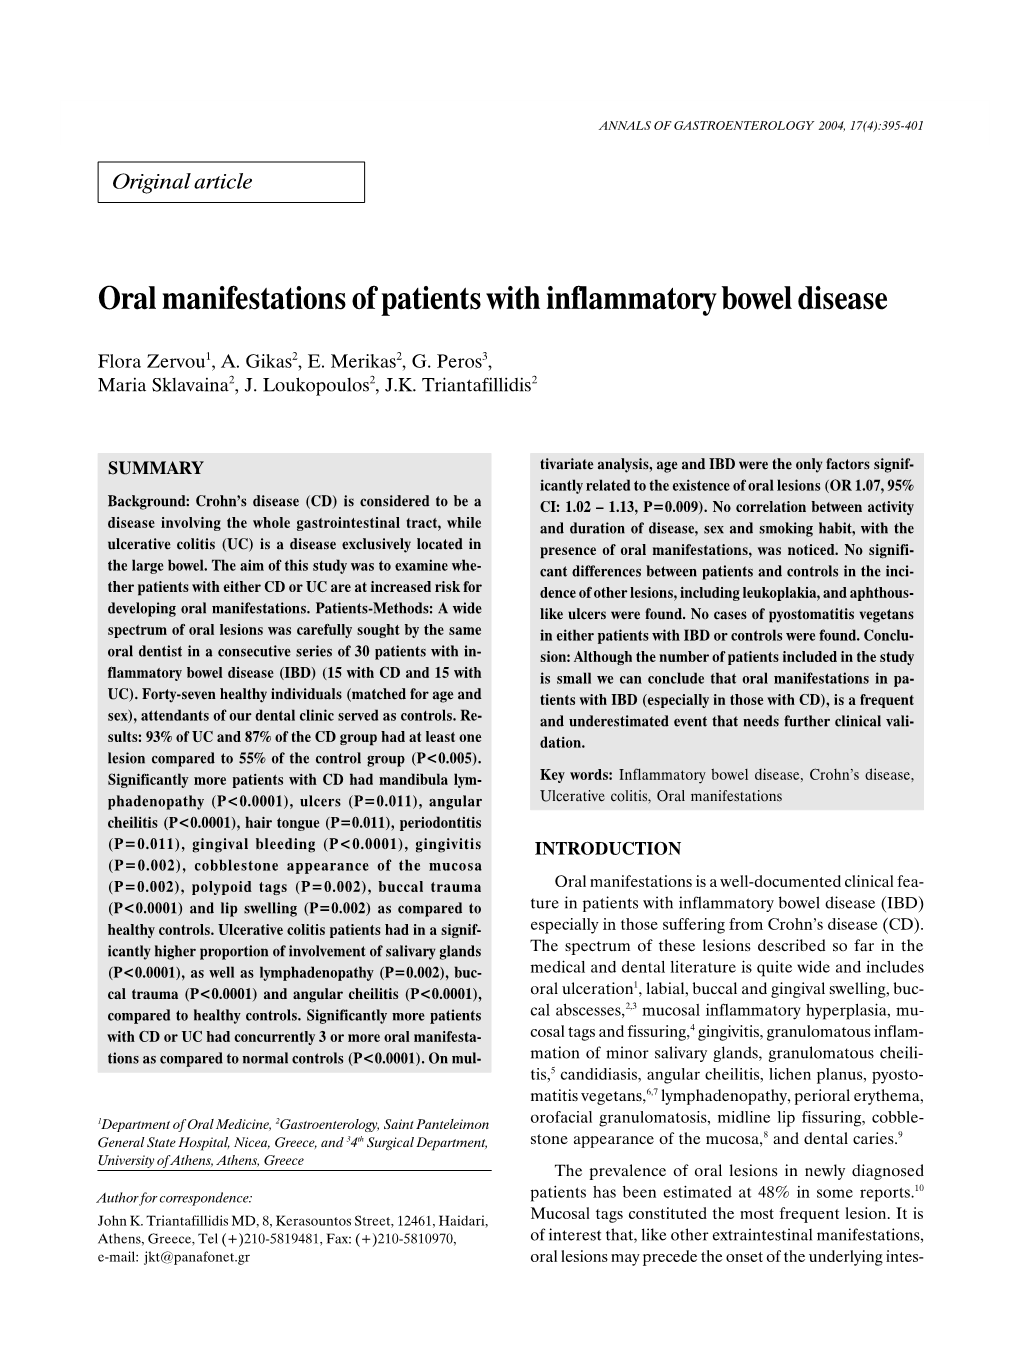 Oral Manifestations of Patients with Inflammatory Bowel Disease